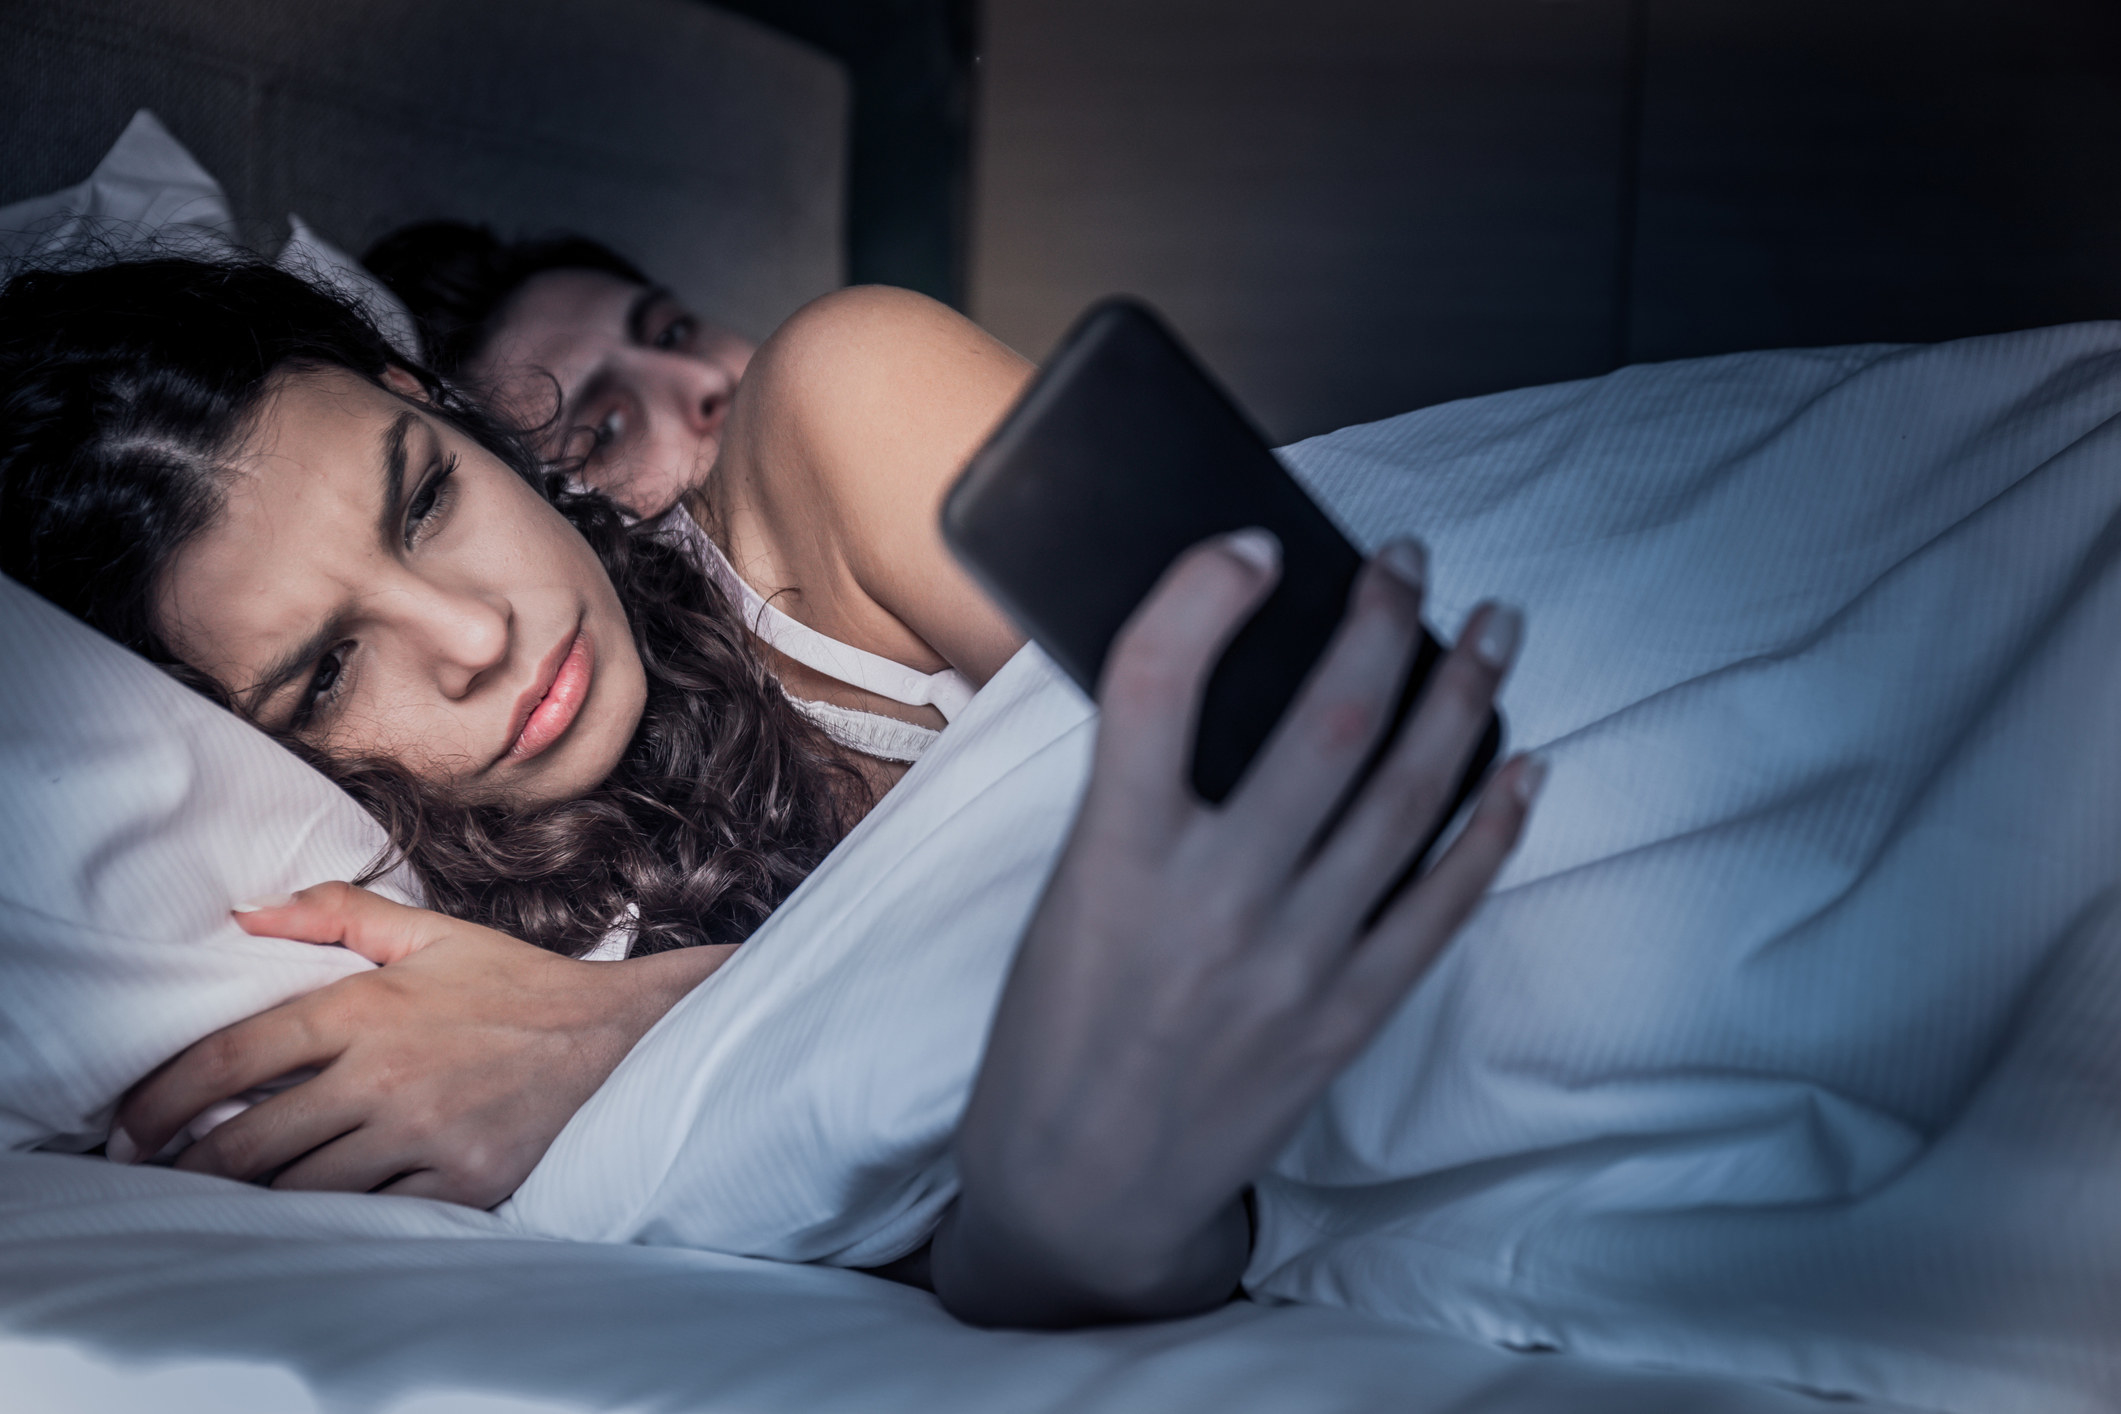 Woman on her phone in bed beside partner